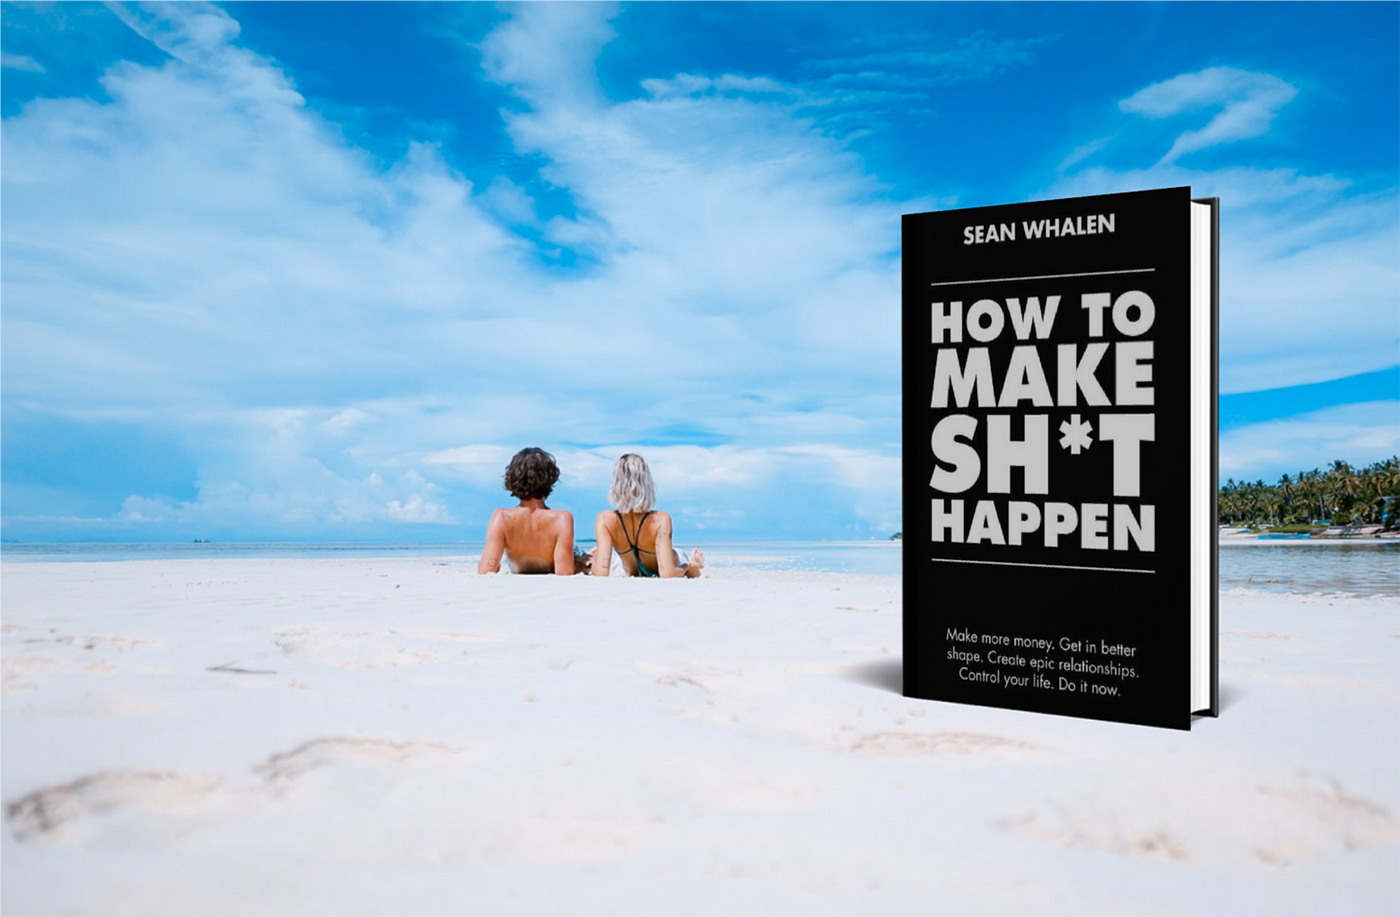 Get Your Sh*t Together Summary of Key Ideas and Review